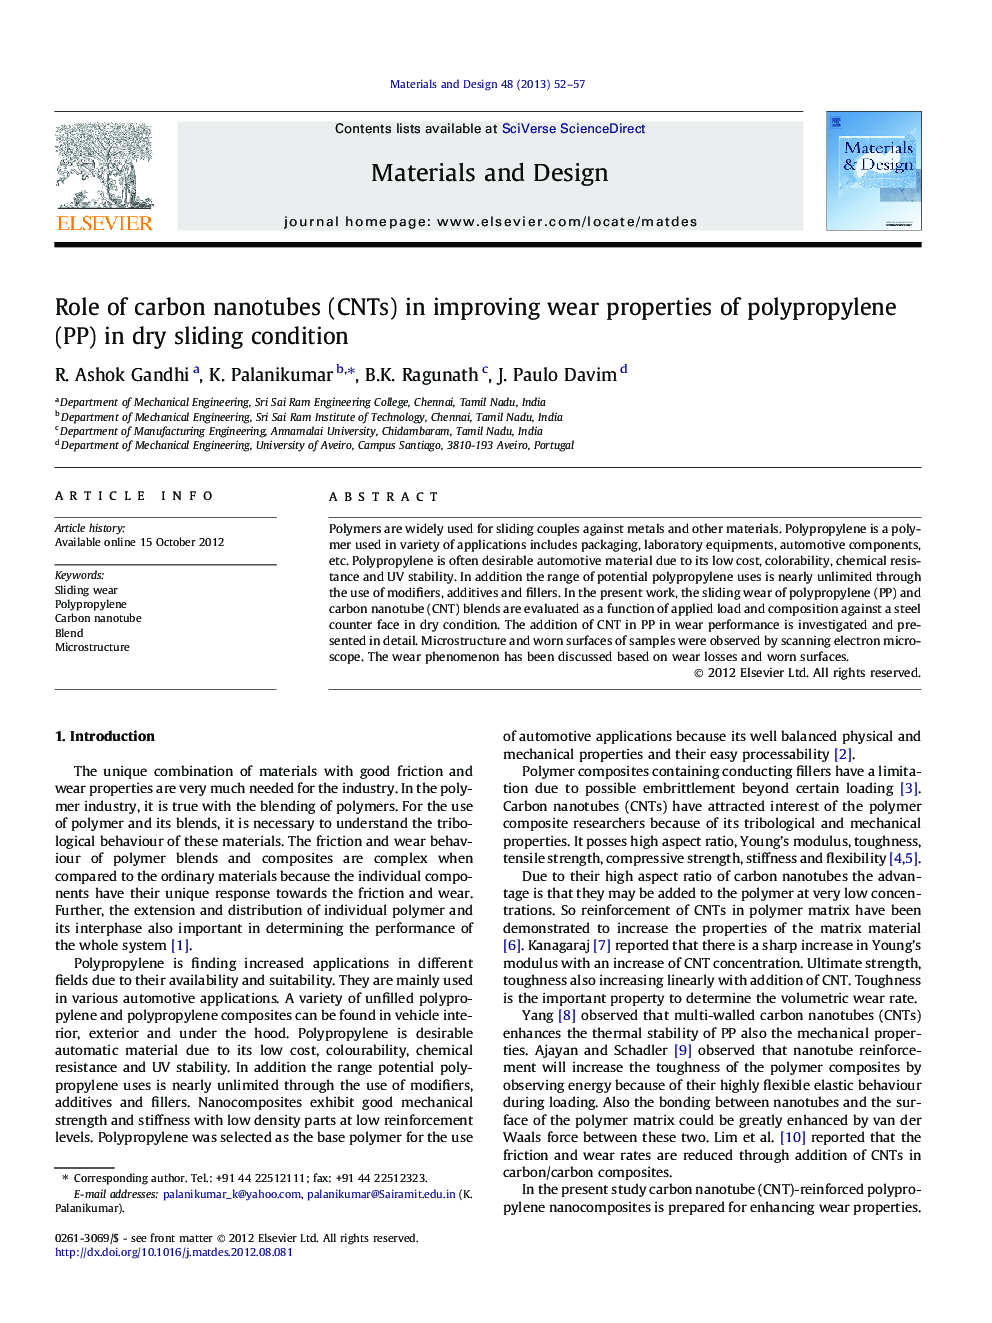 Role of carbon nanotubes (CNTs) in improving wear properties of polypropylene (PP) in dry sliding condition